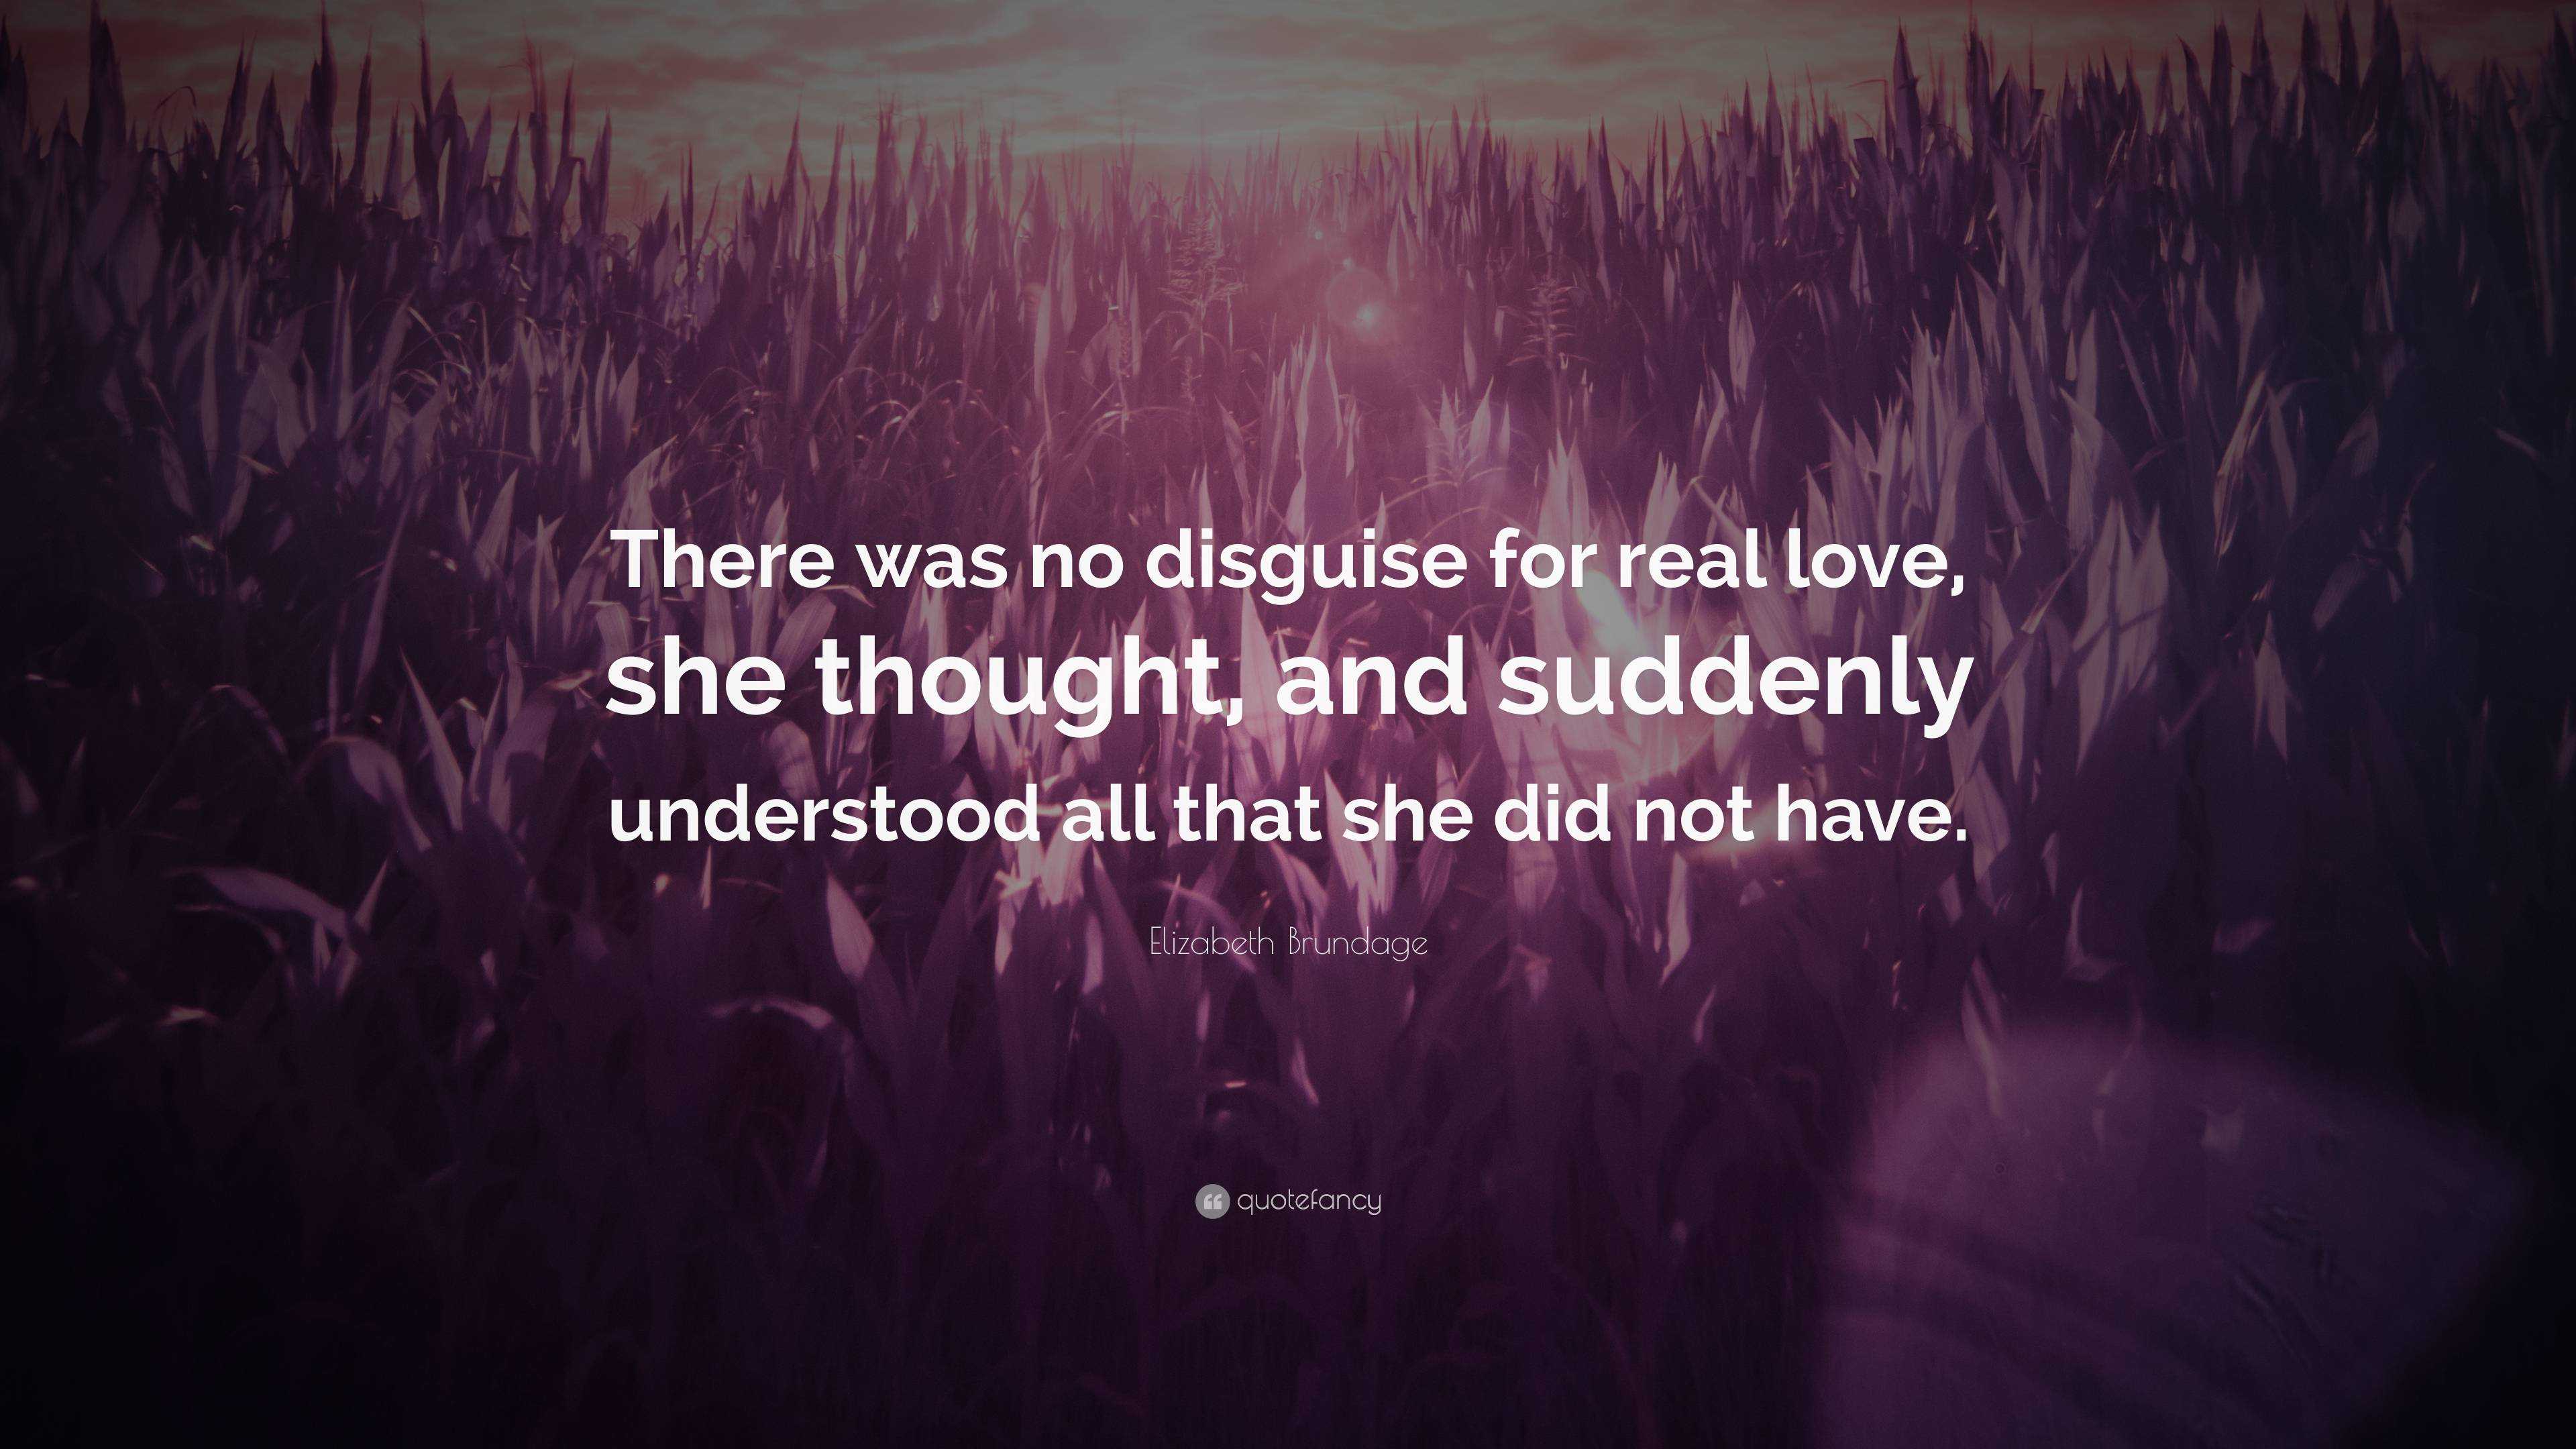 Elizabeth Brundage Quote: “There was no disguise for real love, she ...